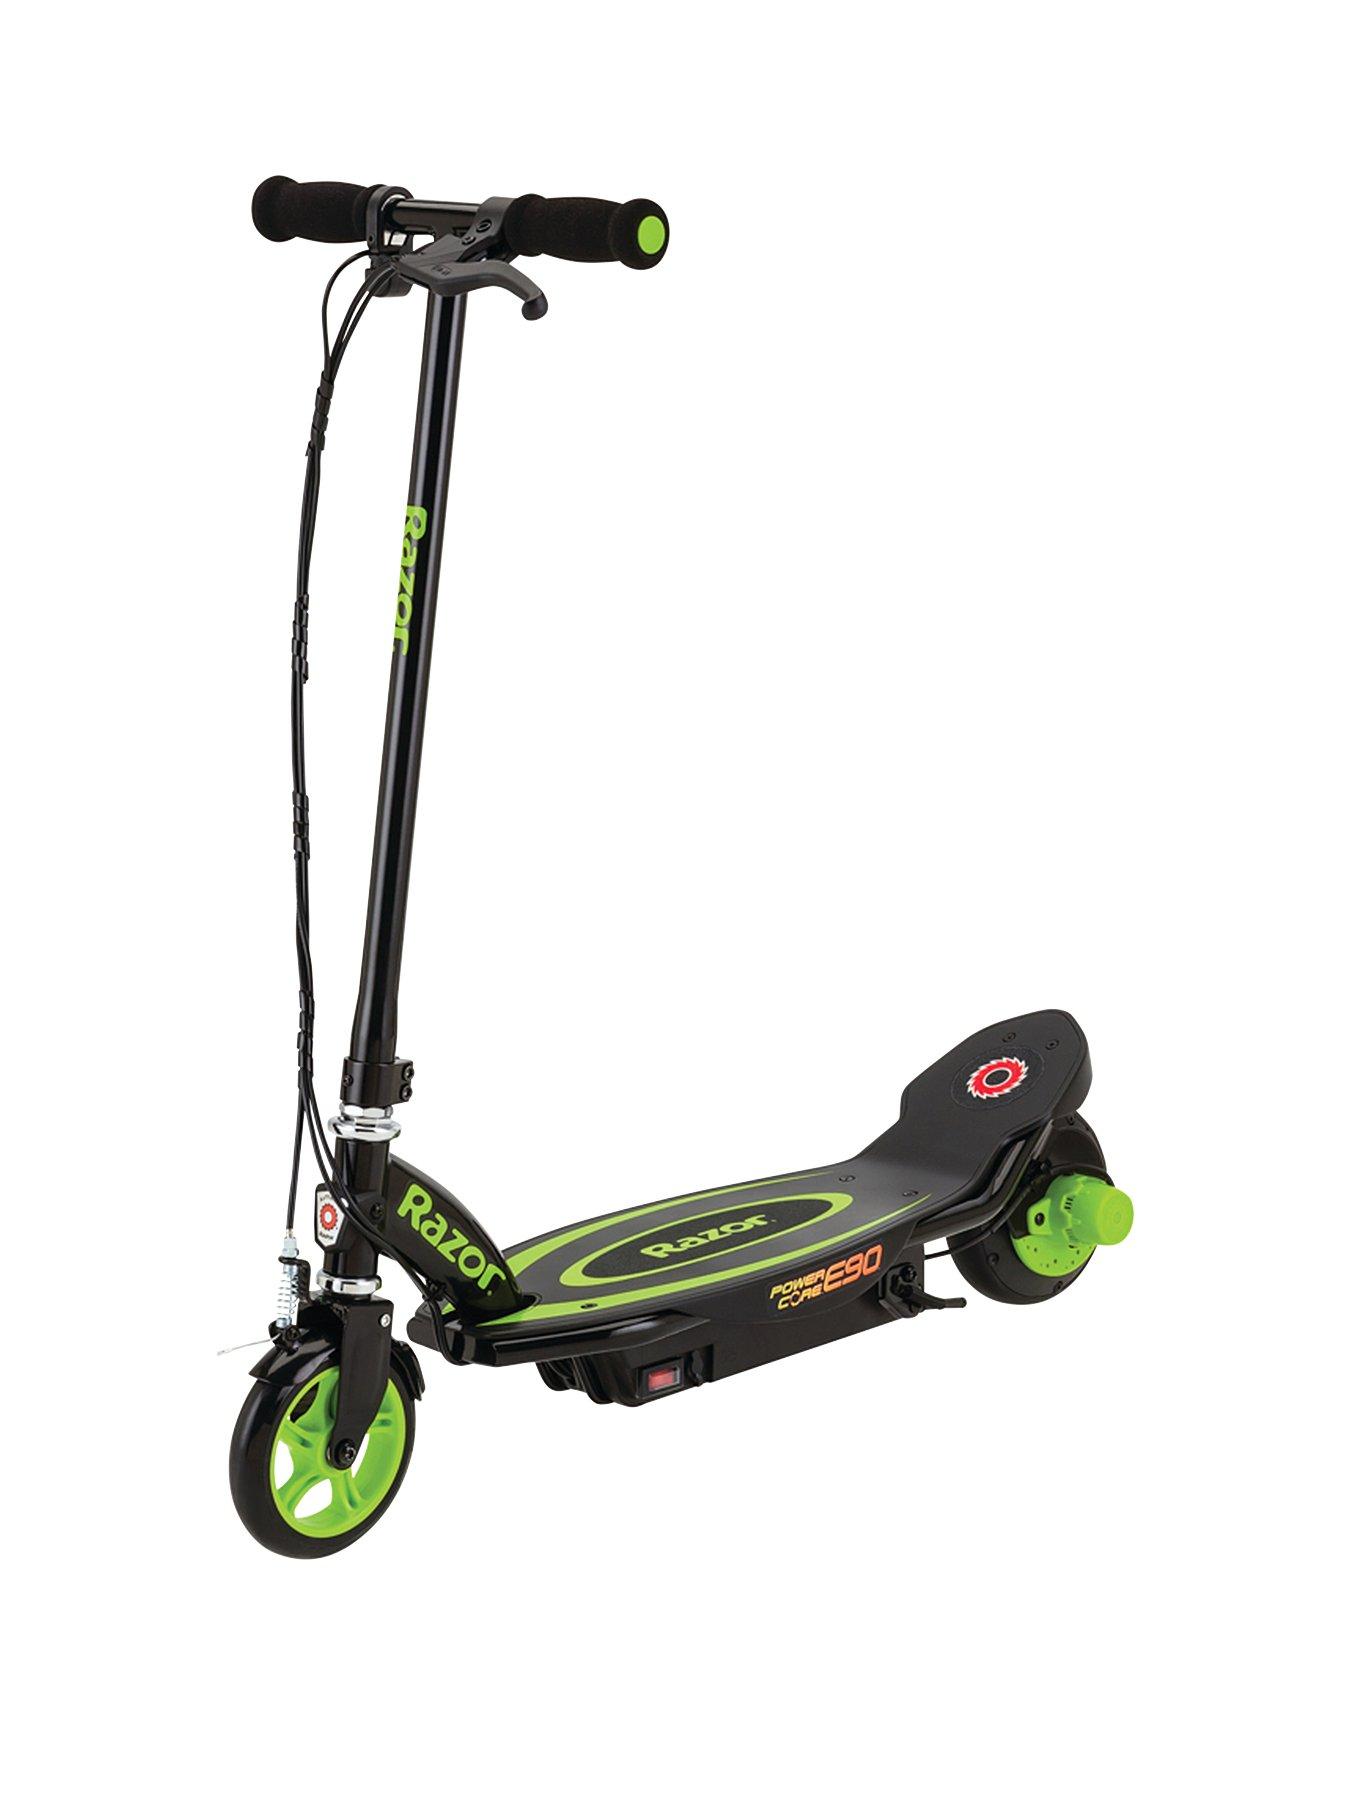 razor scooter for 10 year old